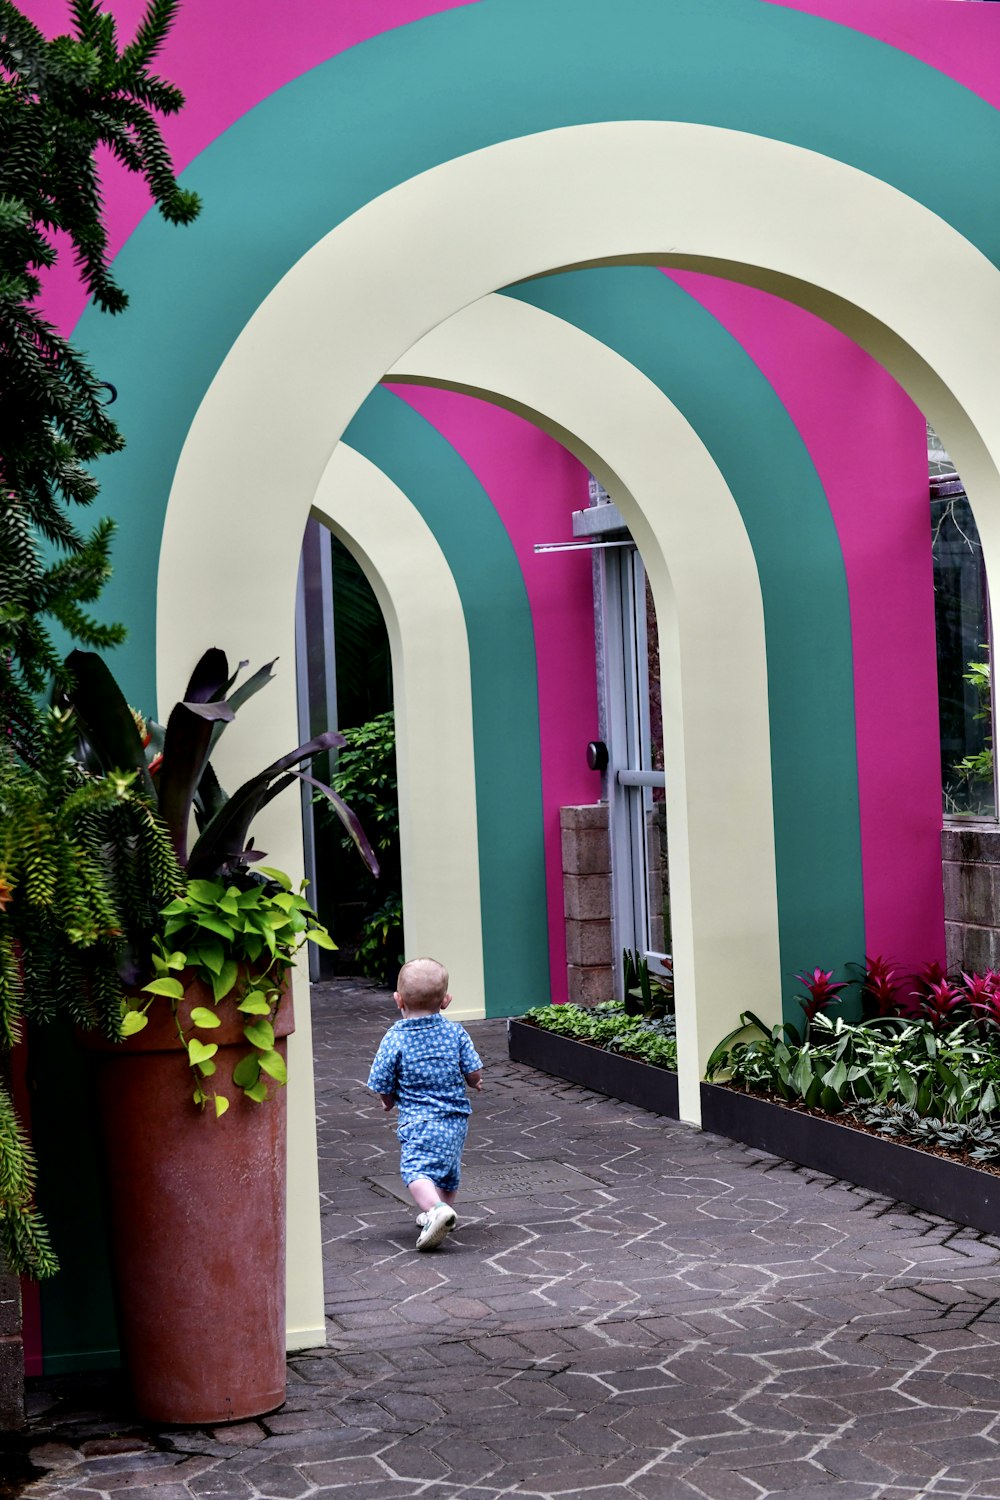 a small child walking down a walkway in front of a building